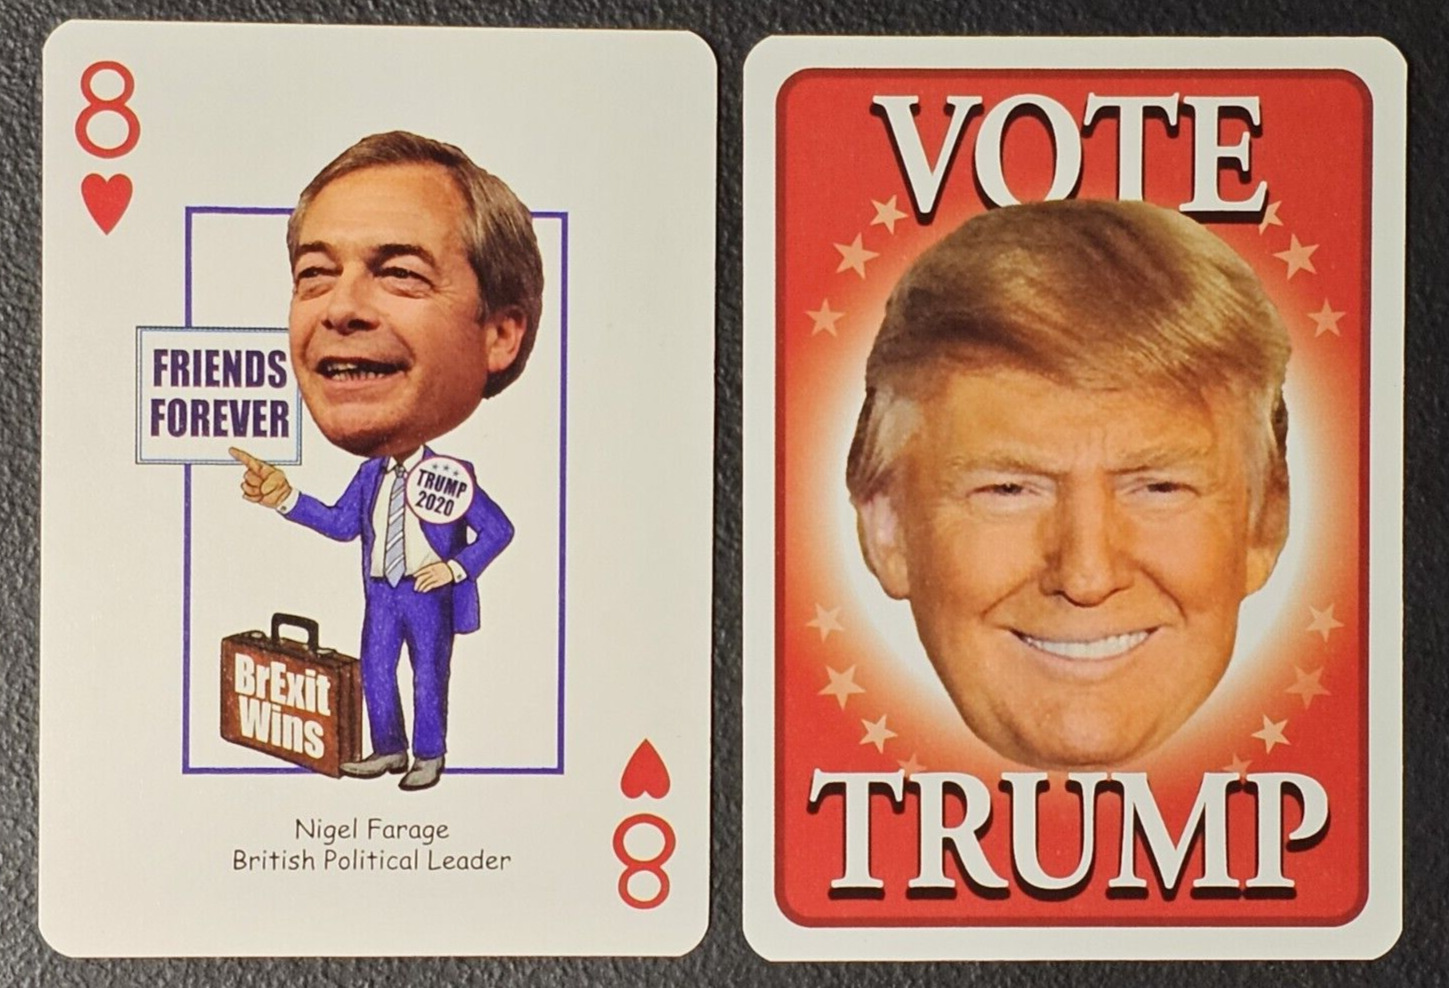 Nigel Farage British Leader 8 of Hearts - Vote Trump for President Playing Card